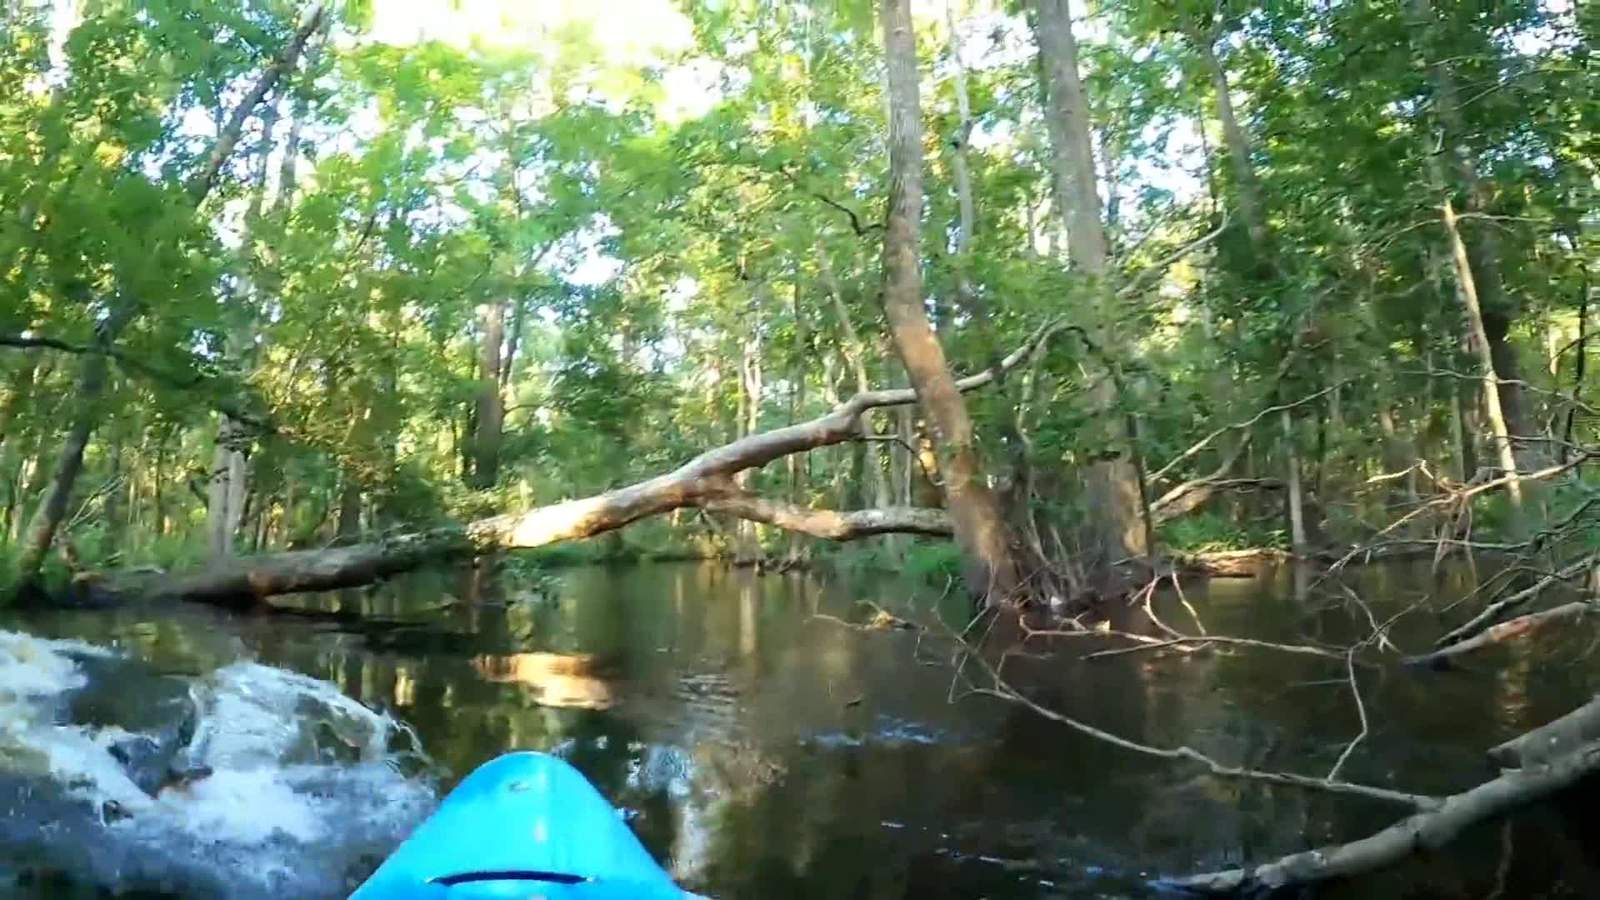 WATCH: An alligator slammed into the side of a kayak, tipping the boater into the river